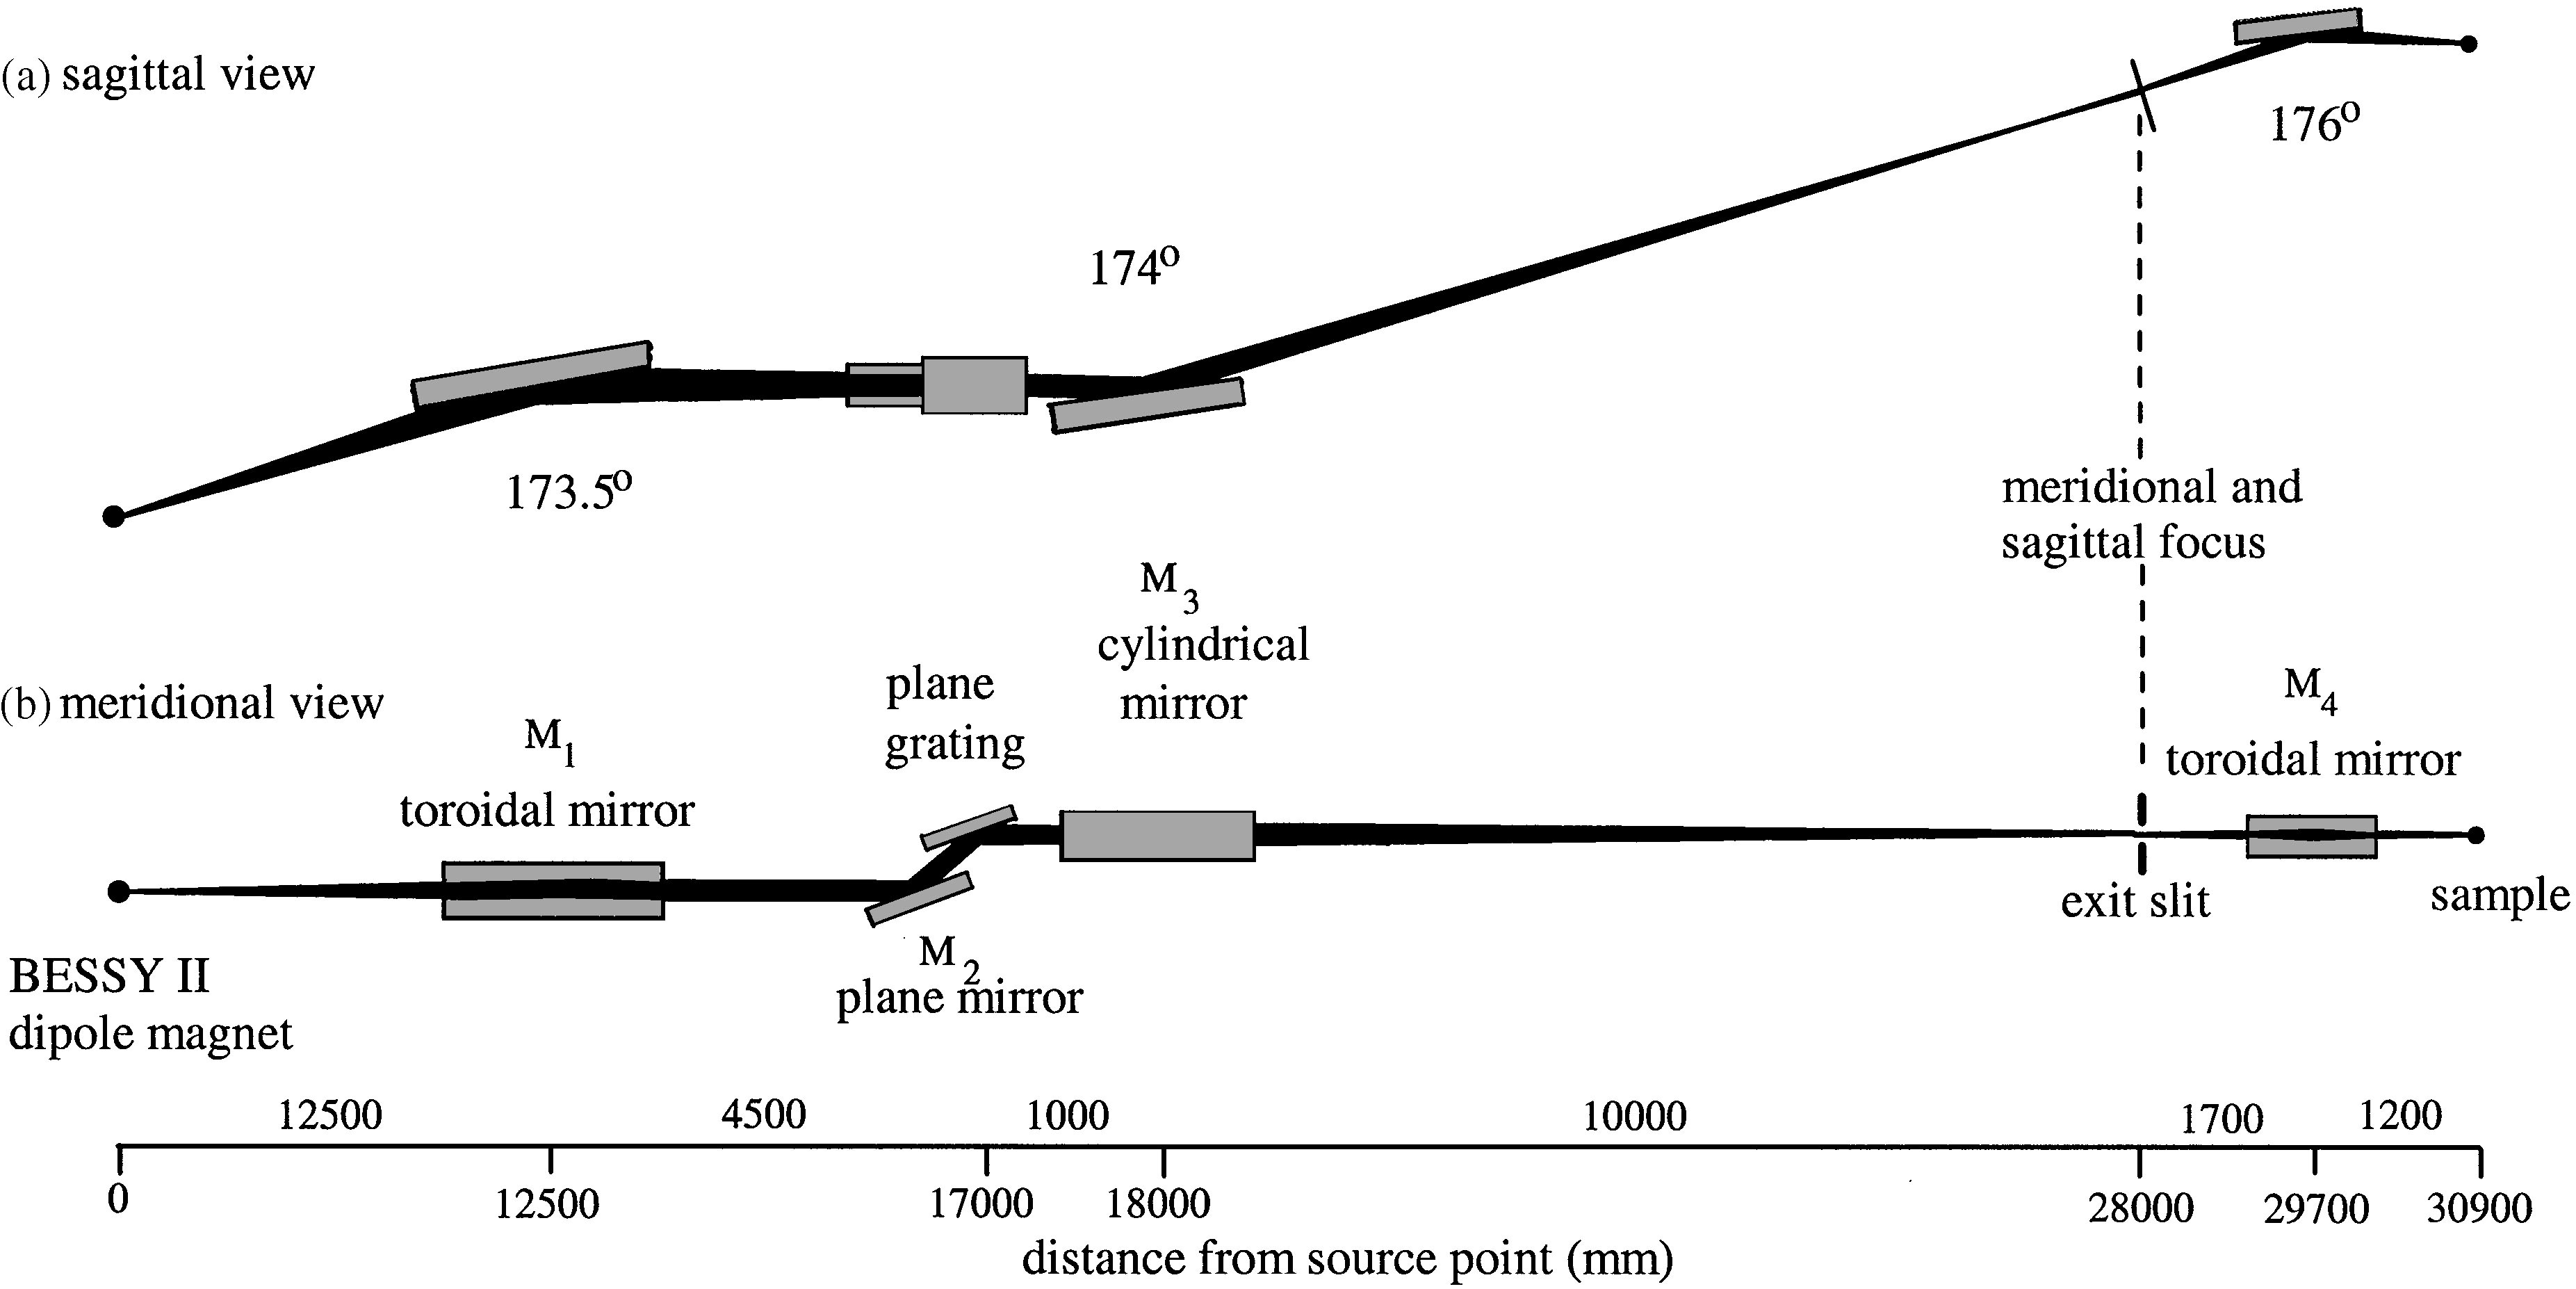 Optical layout of the Russian–German dipole Beamline. [Gorovikov et al., Nucl. Instrum. Methods Phys. Res. A: Accel. Spectrom. Detect. Assoc. Equip. 467–468 (2001) 565-568]